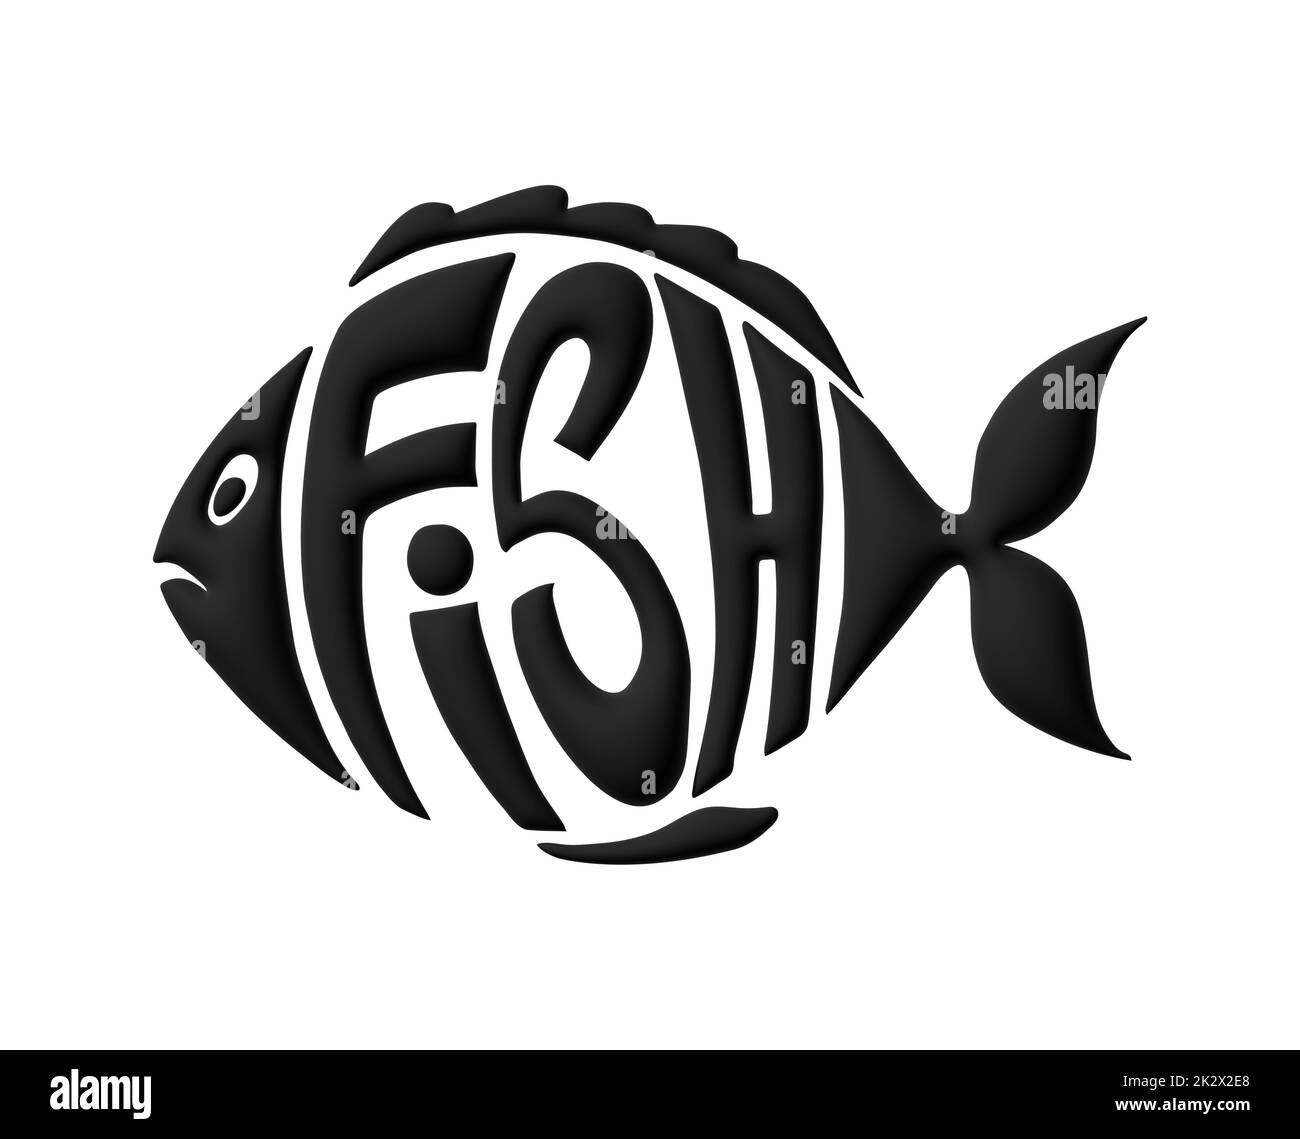 Text stylized as a fish. Stylish design for a brand, label or advertisement Stock Photo